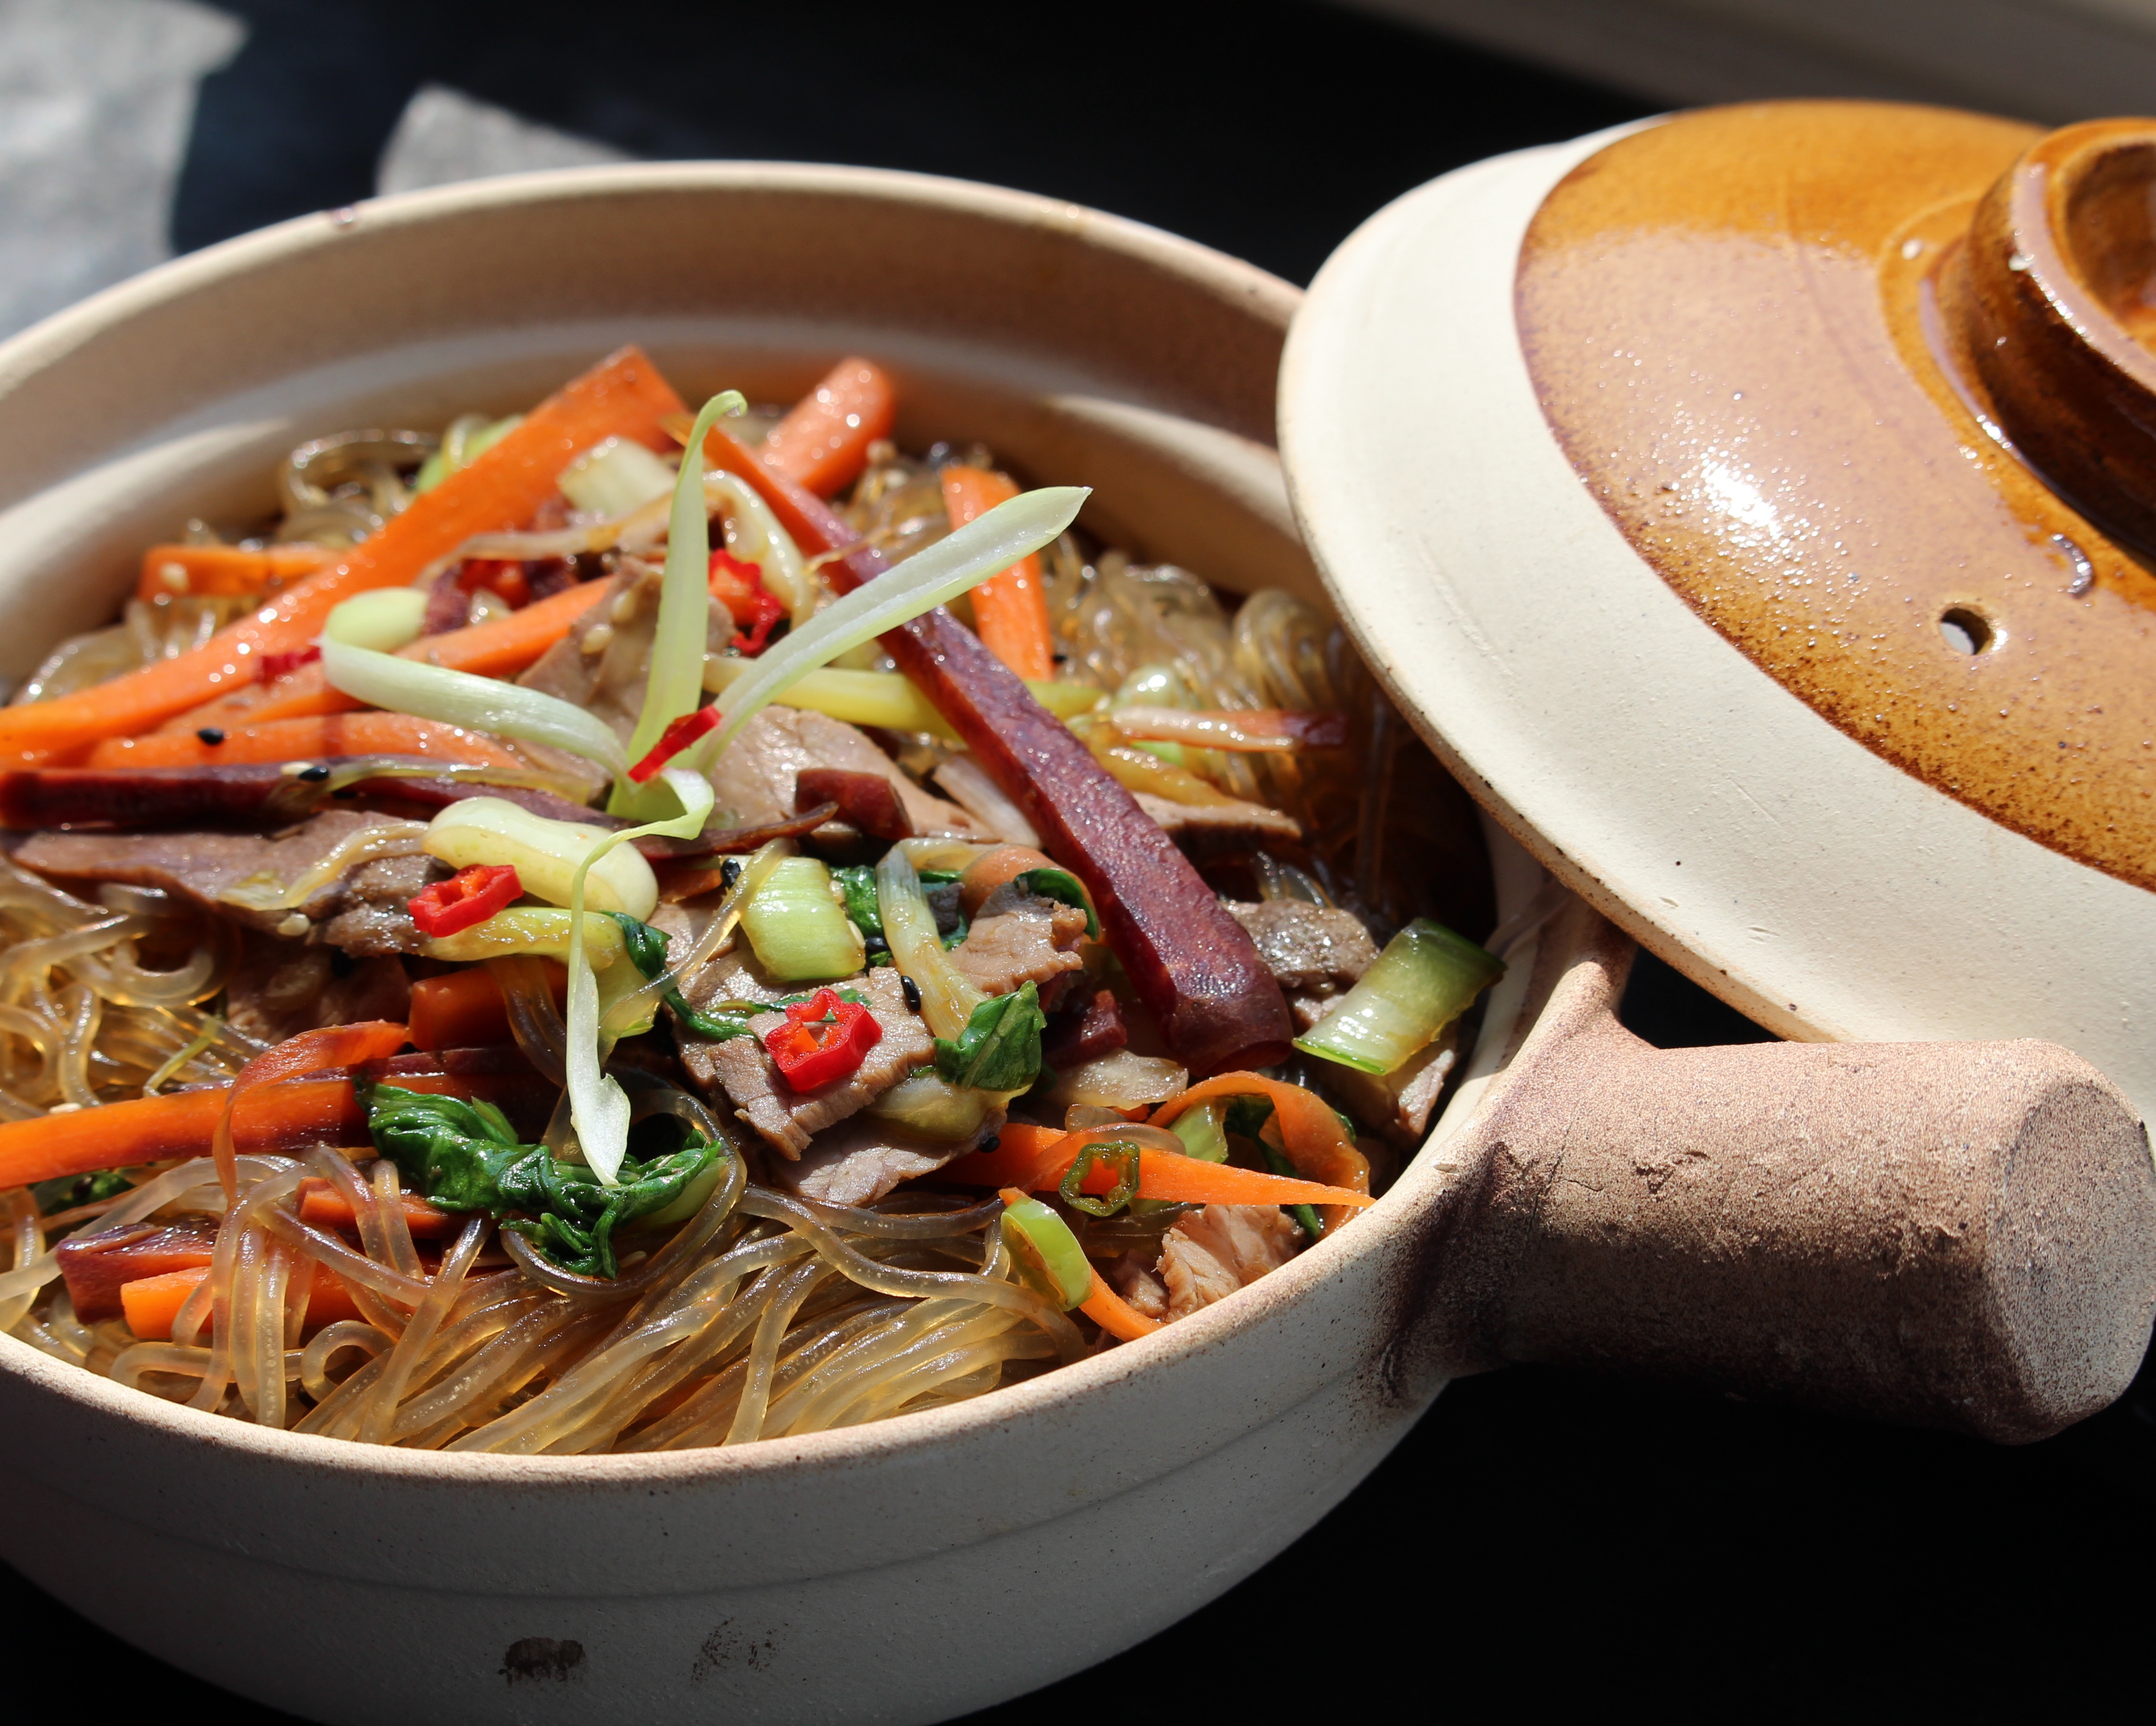 <p>Vermicelli noodles, vegetables, and beef are tossed with a homemade japchae soy-sesame sauce for an authentic Korean dish. Garnish with toasted sesame seeds for crunch. Try it with strips of pork, chicken, shrimp, or tofu, if you prefer.</p>
                          